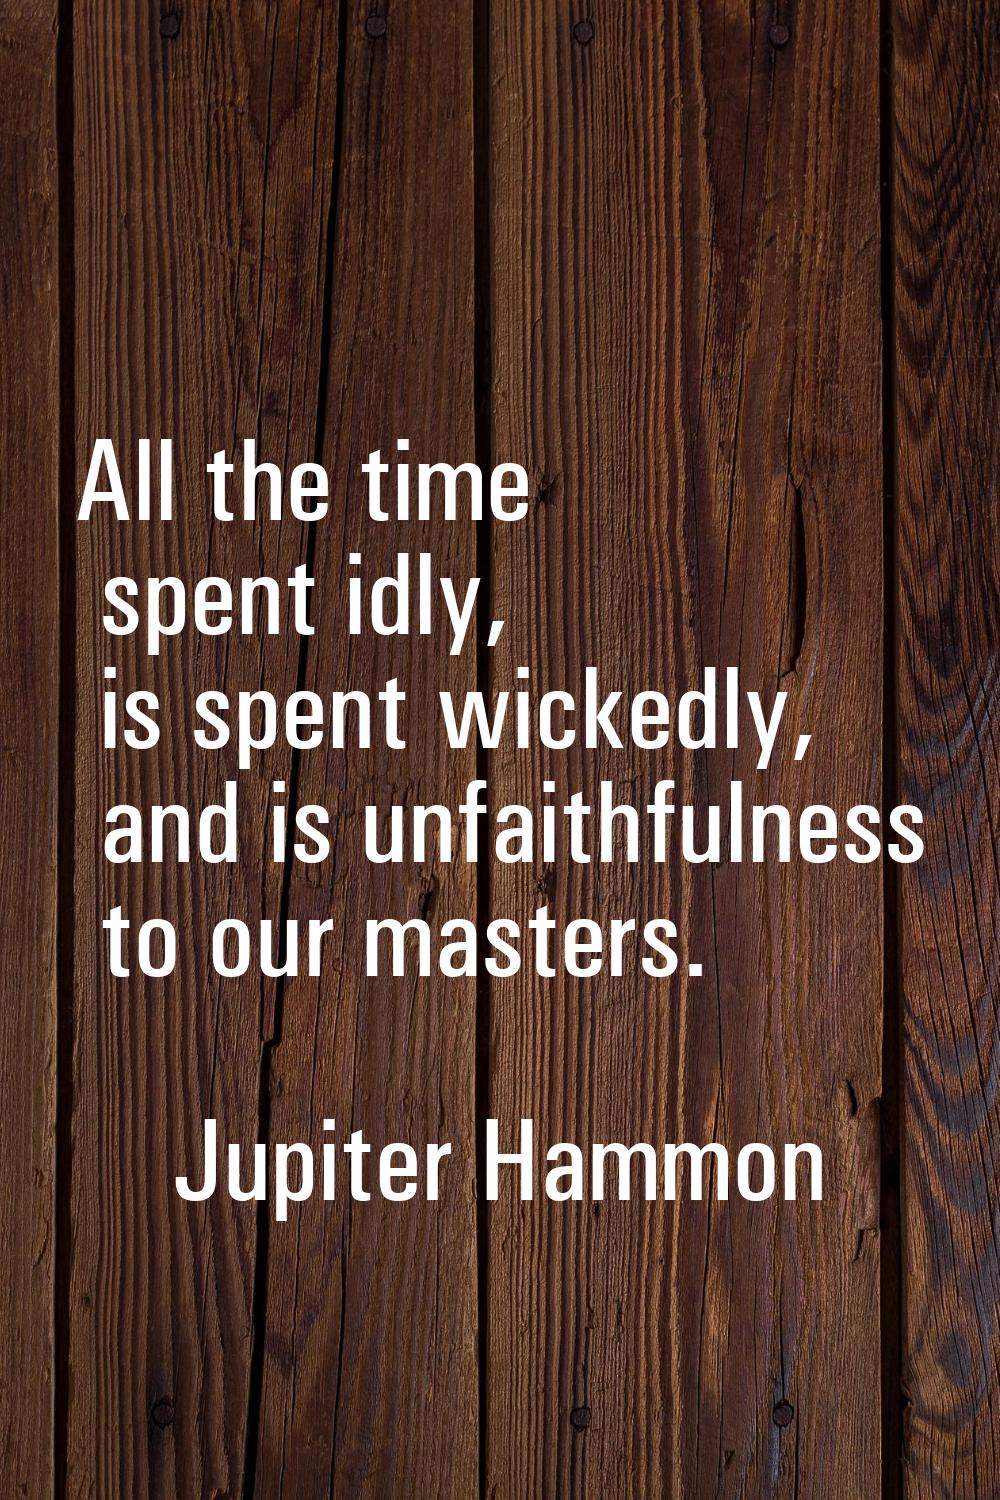 All the time spent idly, is spent wickedly, and is unfaithfulness to our masters.